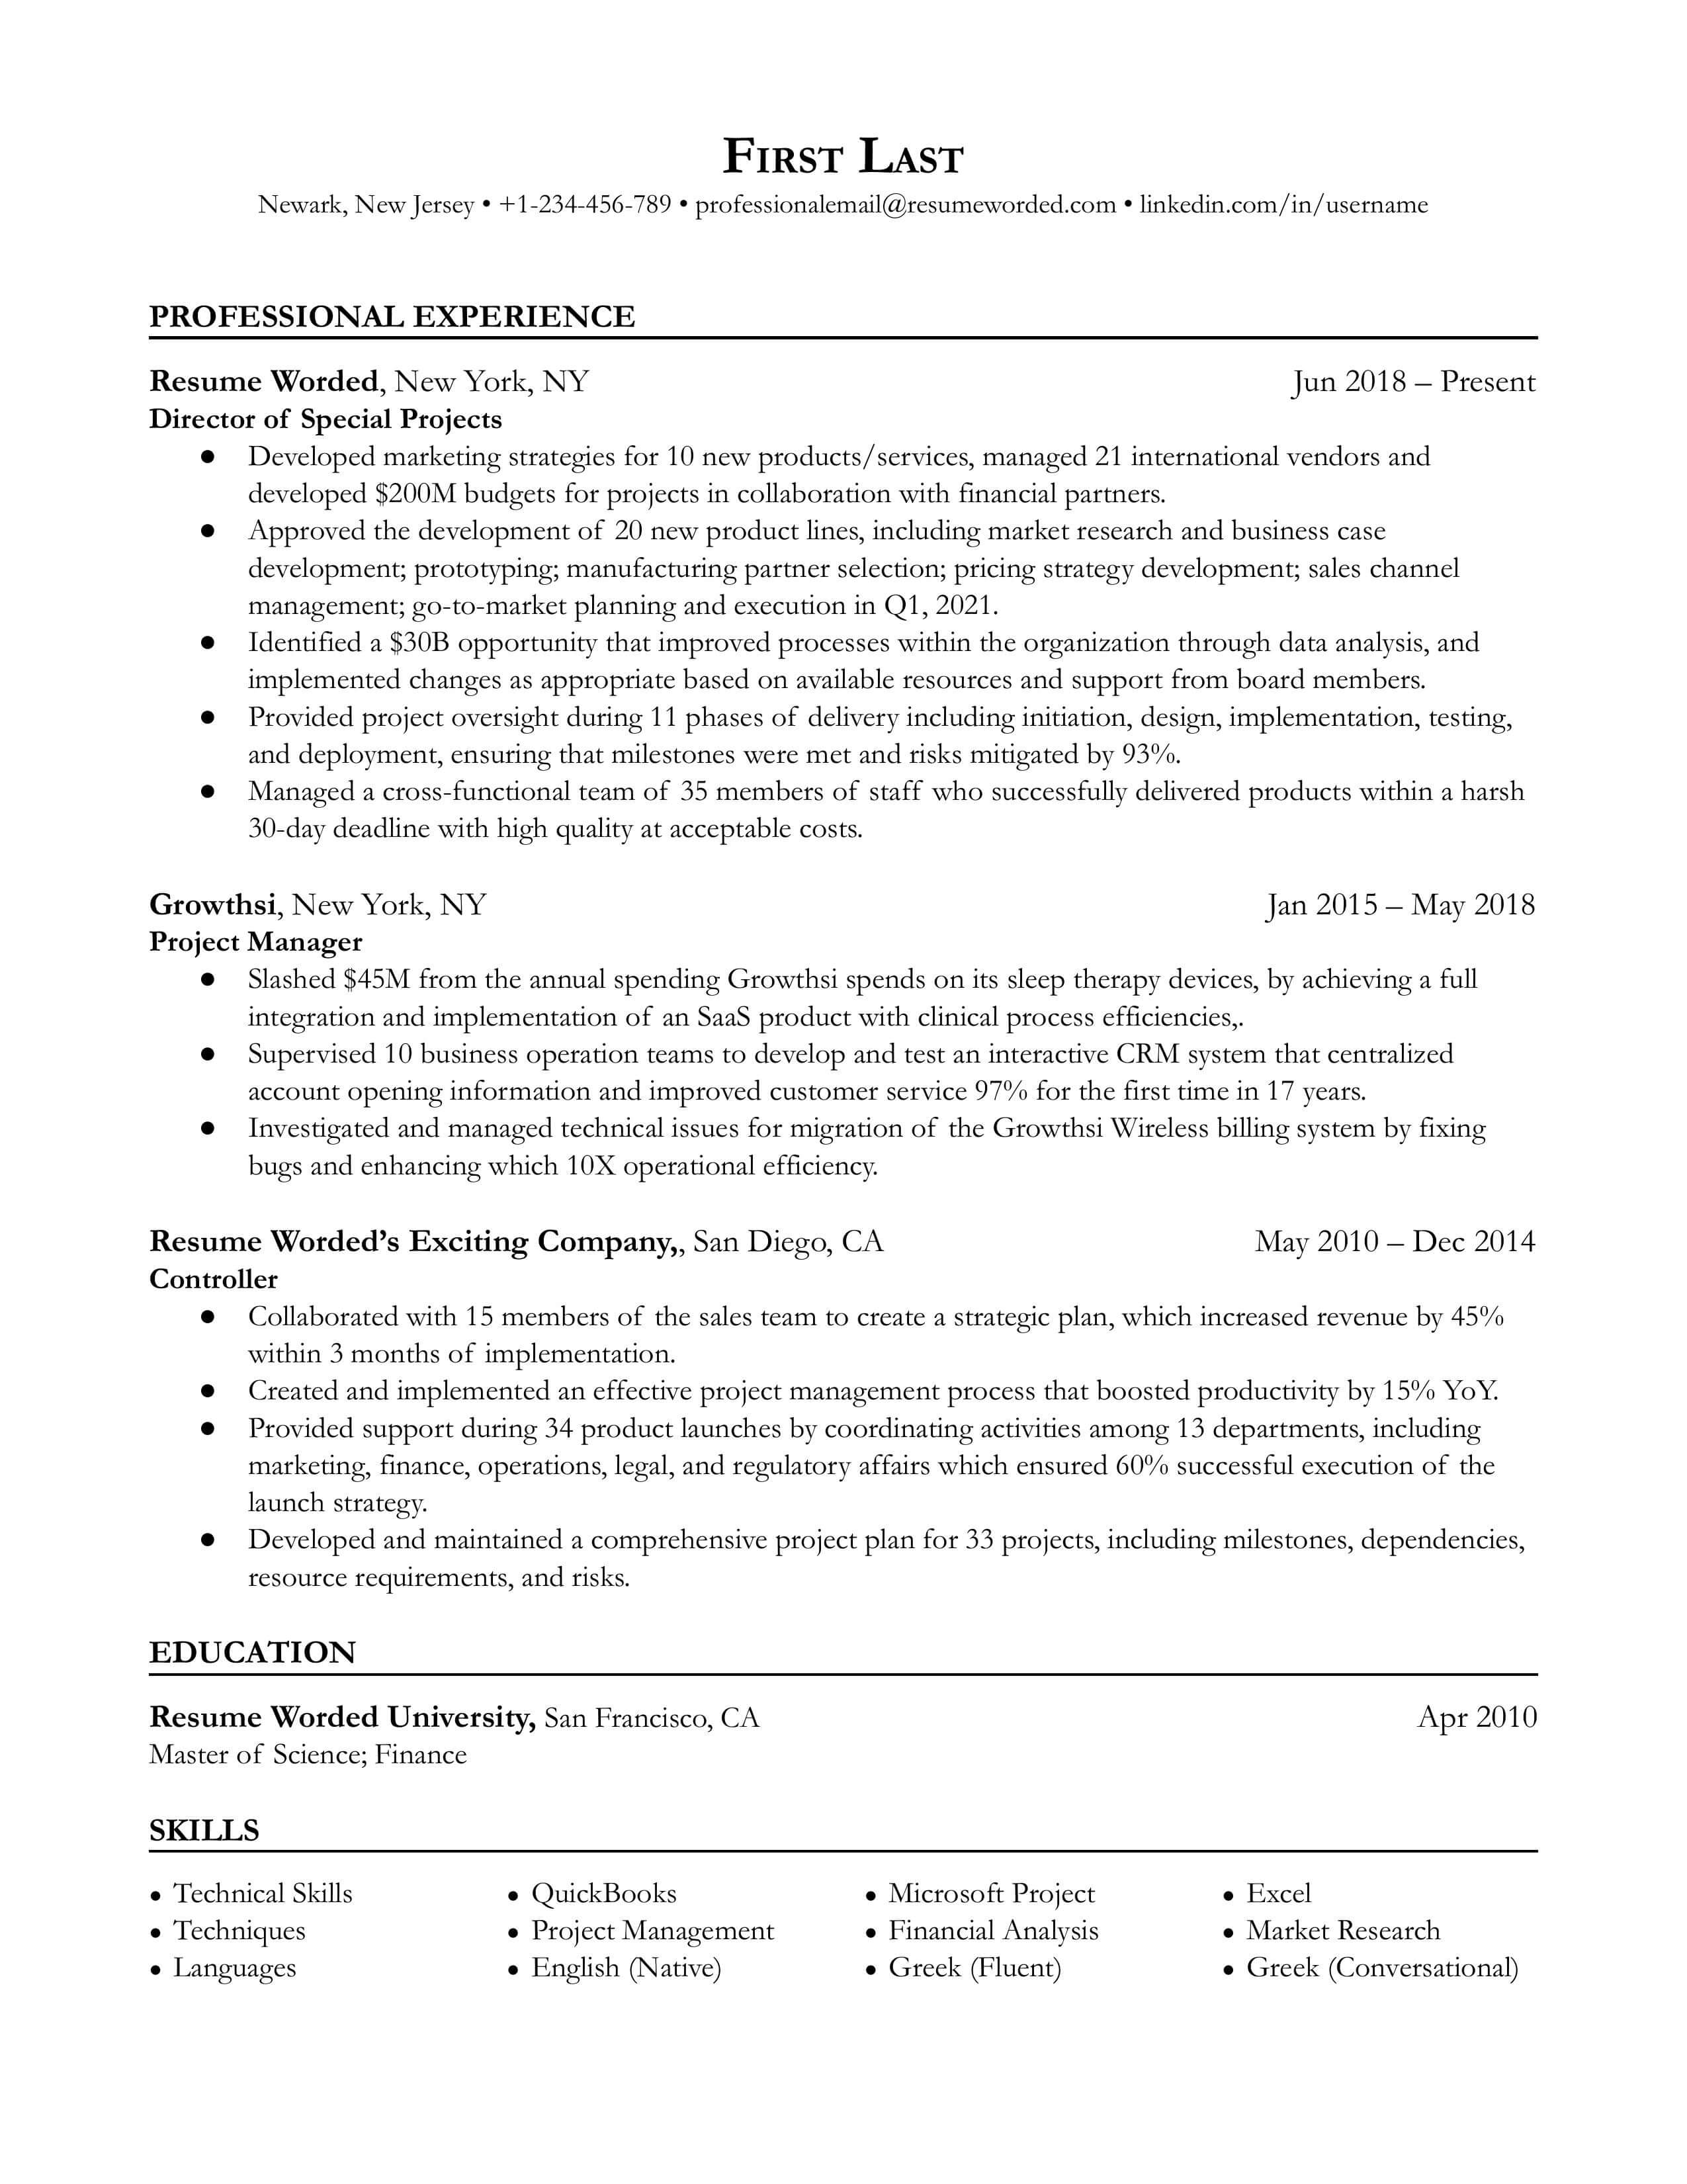 A director of special projects resume template that emphasizes work experience.